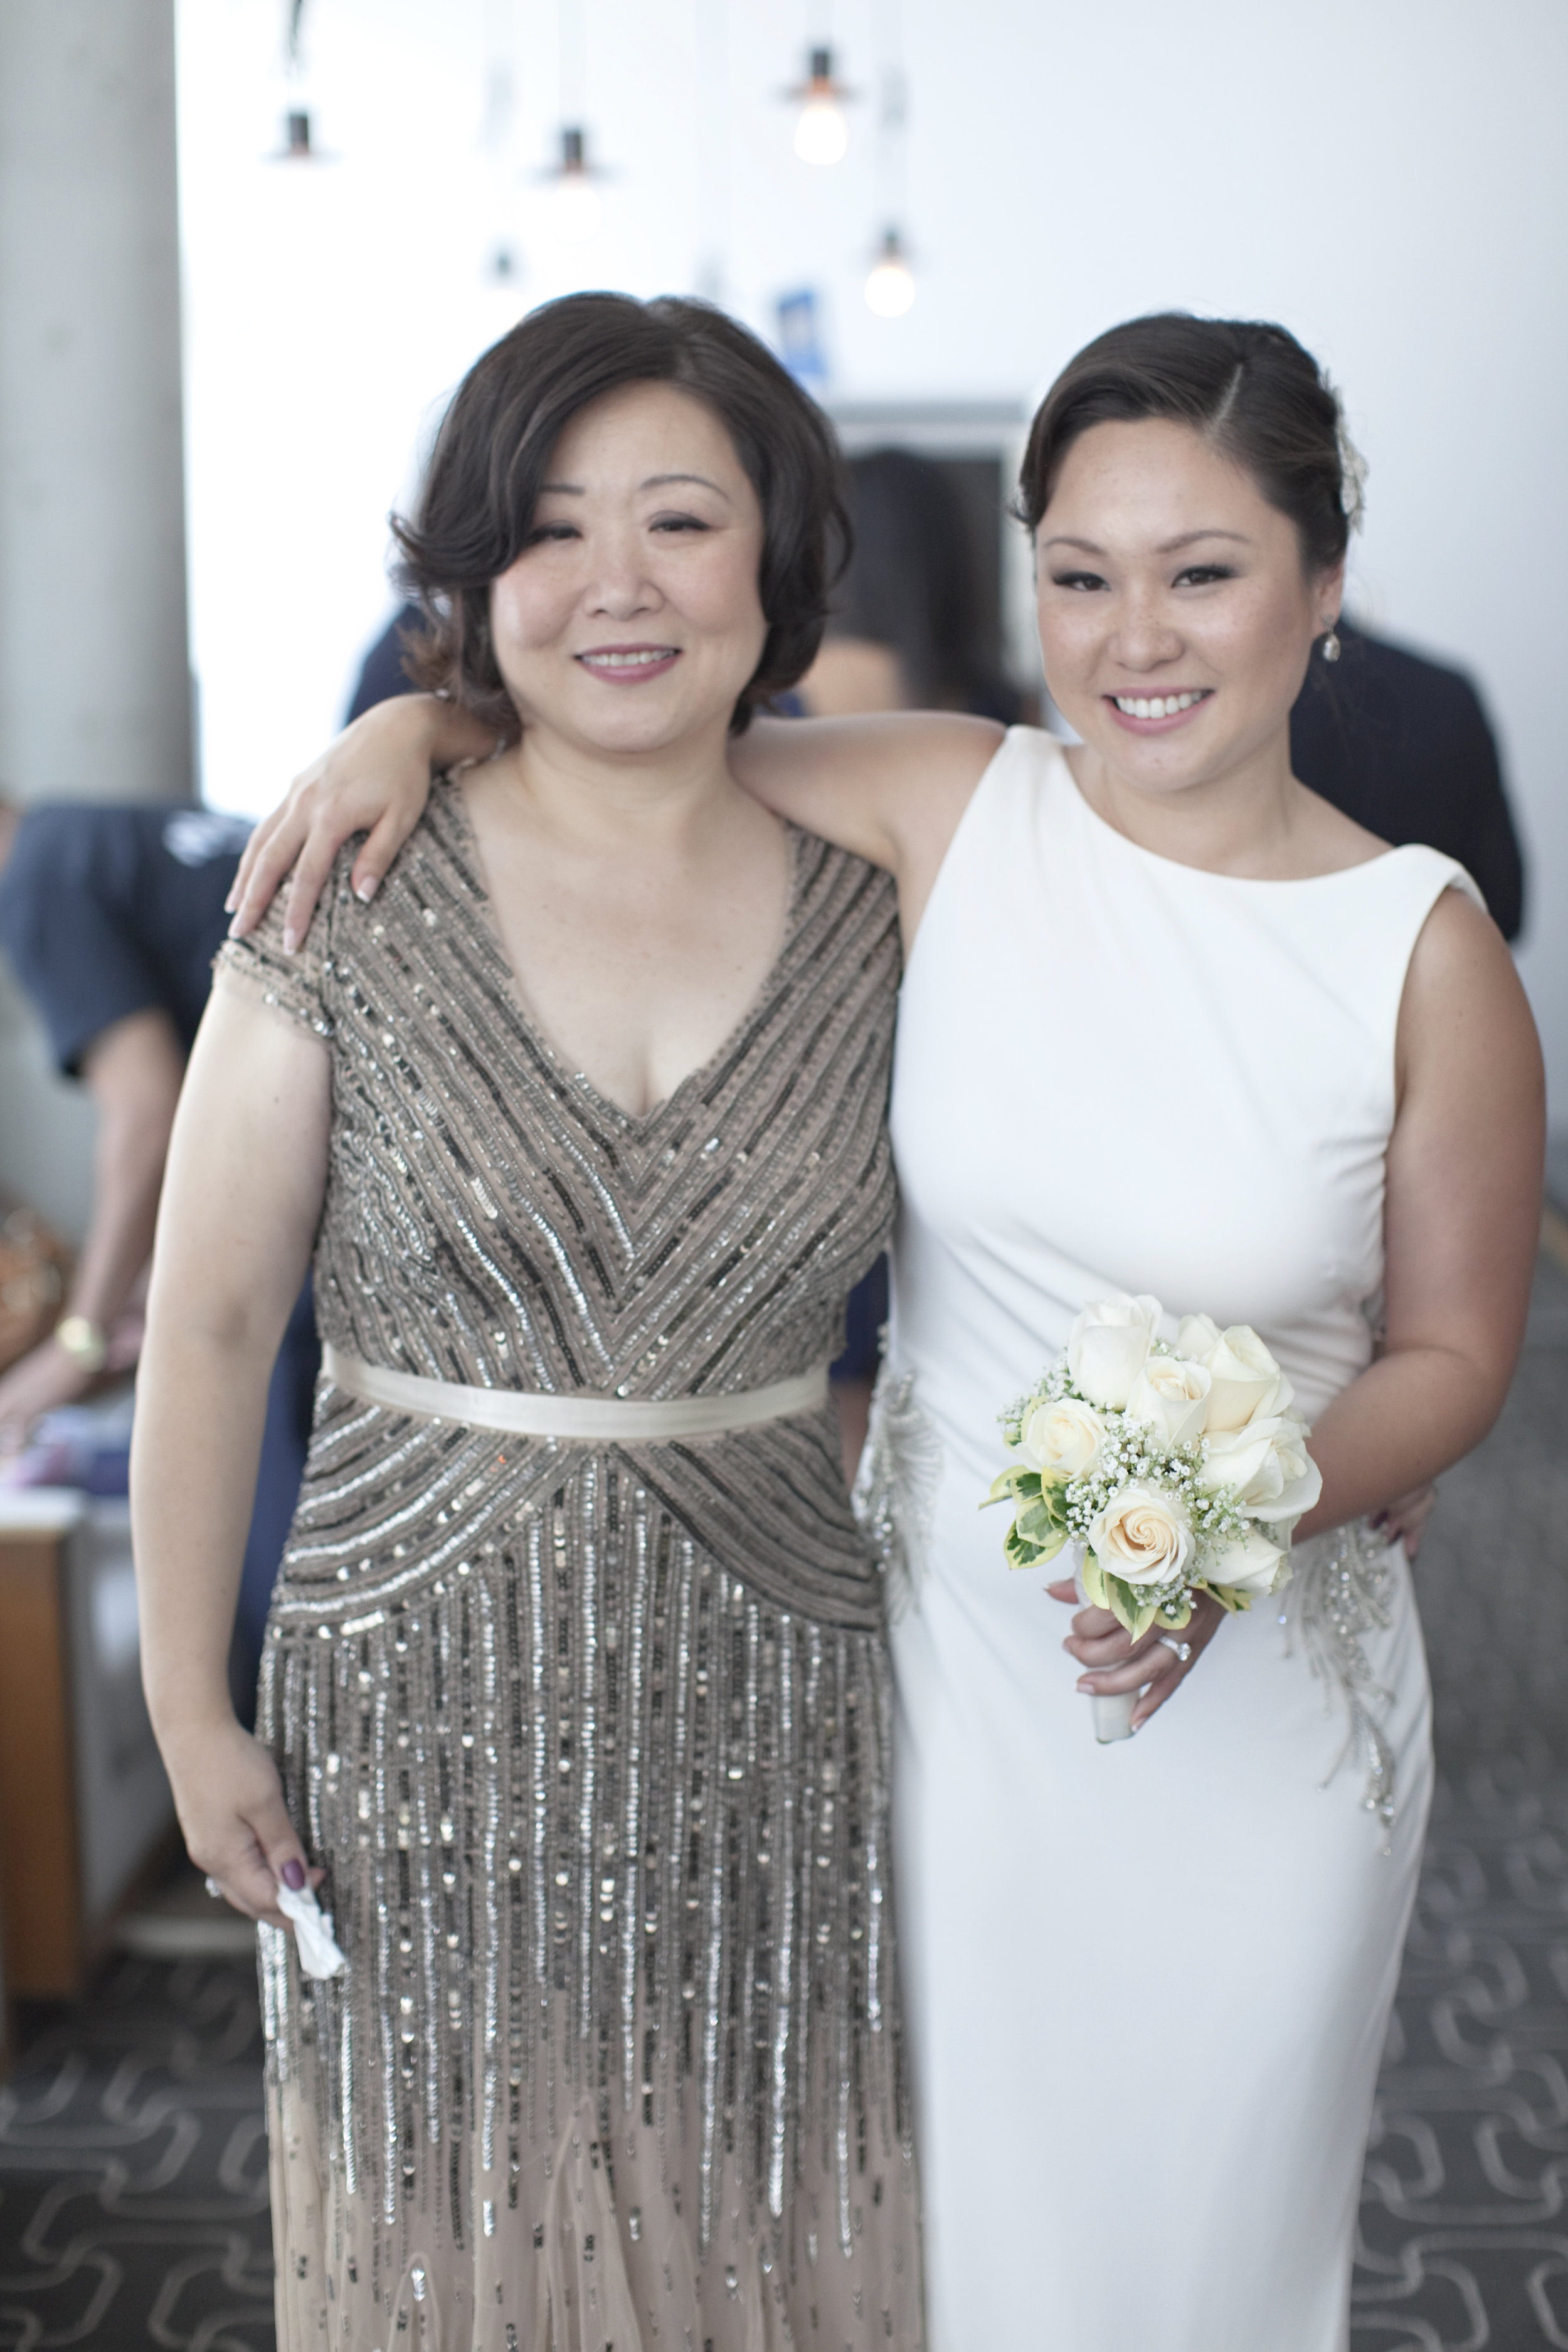 Chinese mom and bride